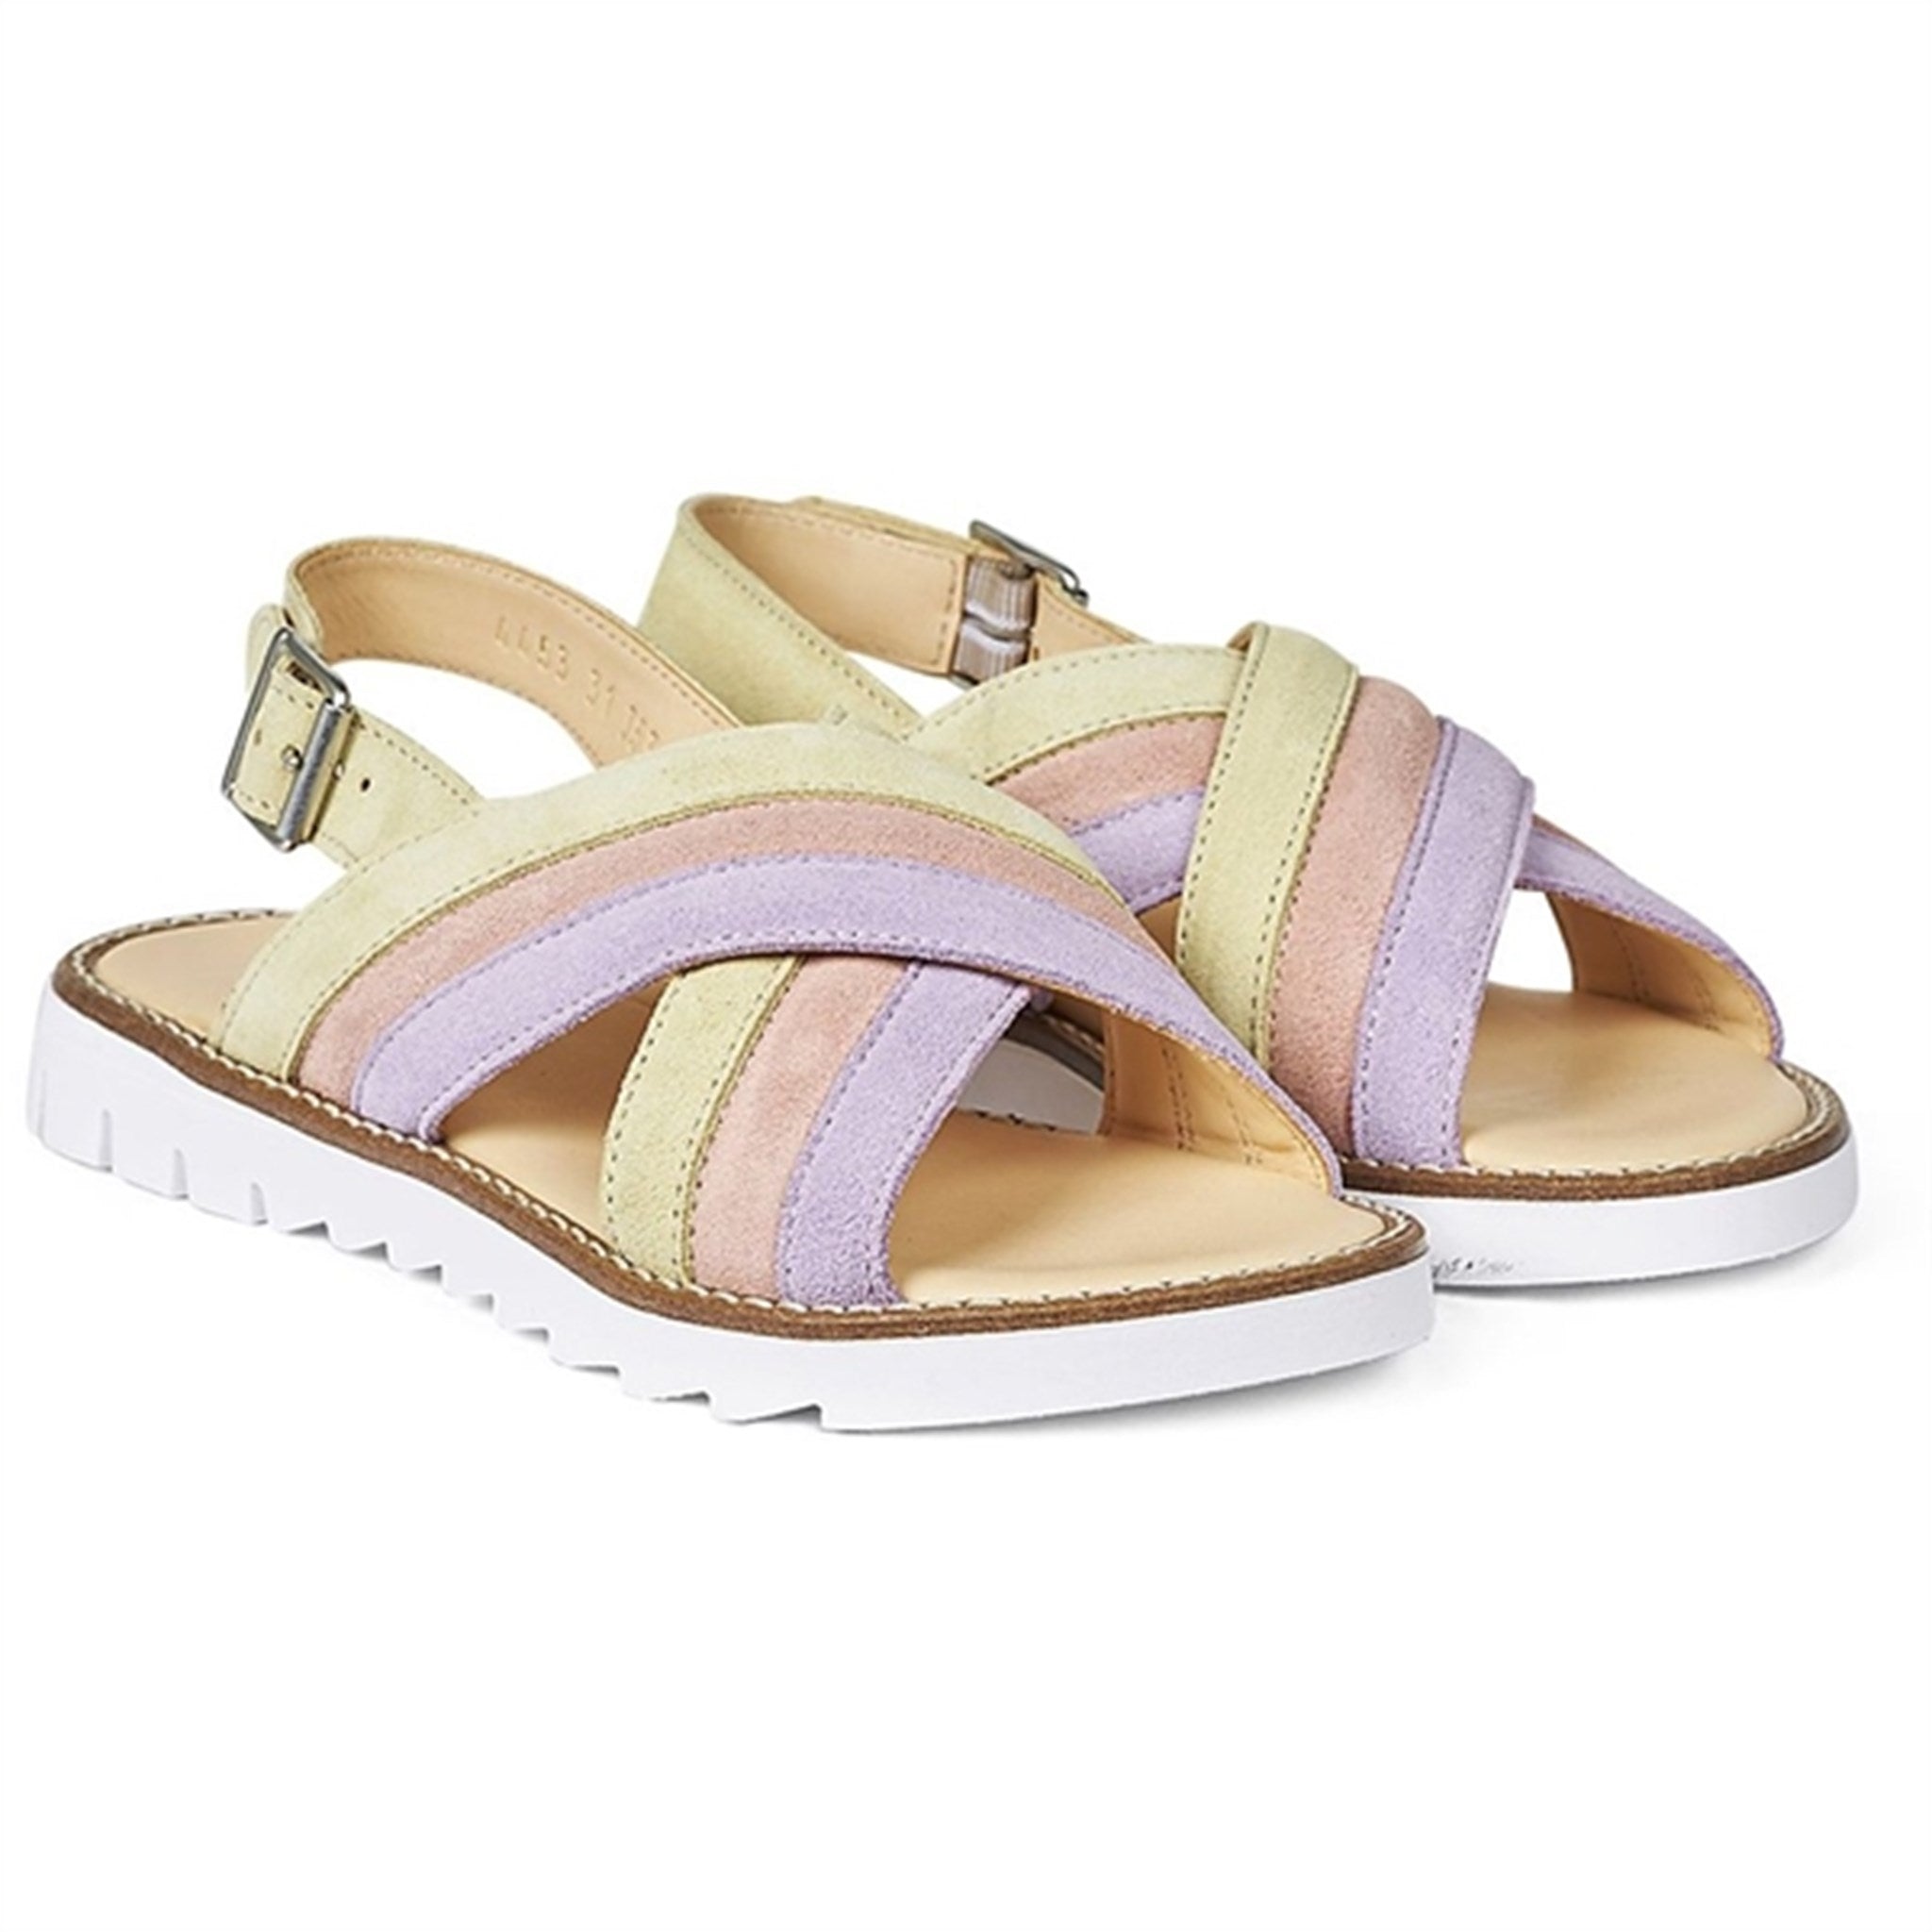 Angulus Sandal W. Open Toe And Buckle Lilac/Peach/Light Yellow